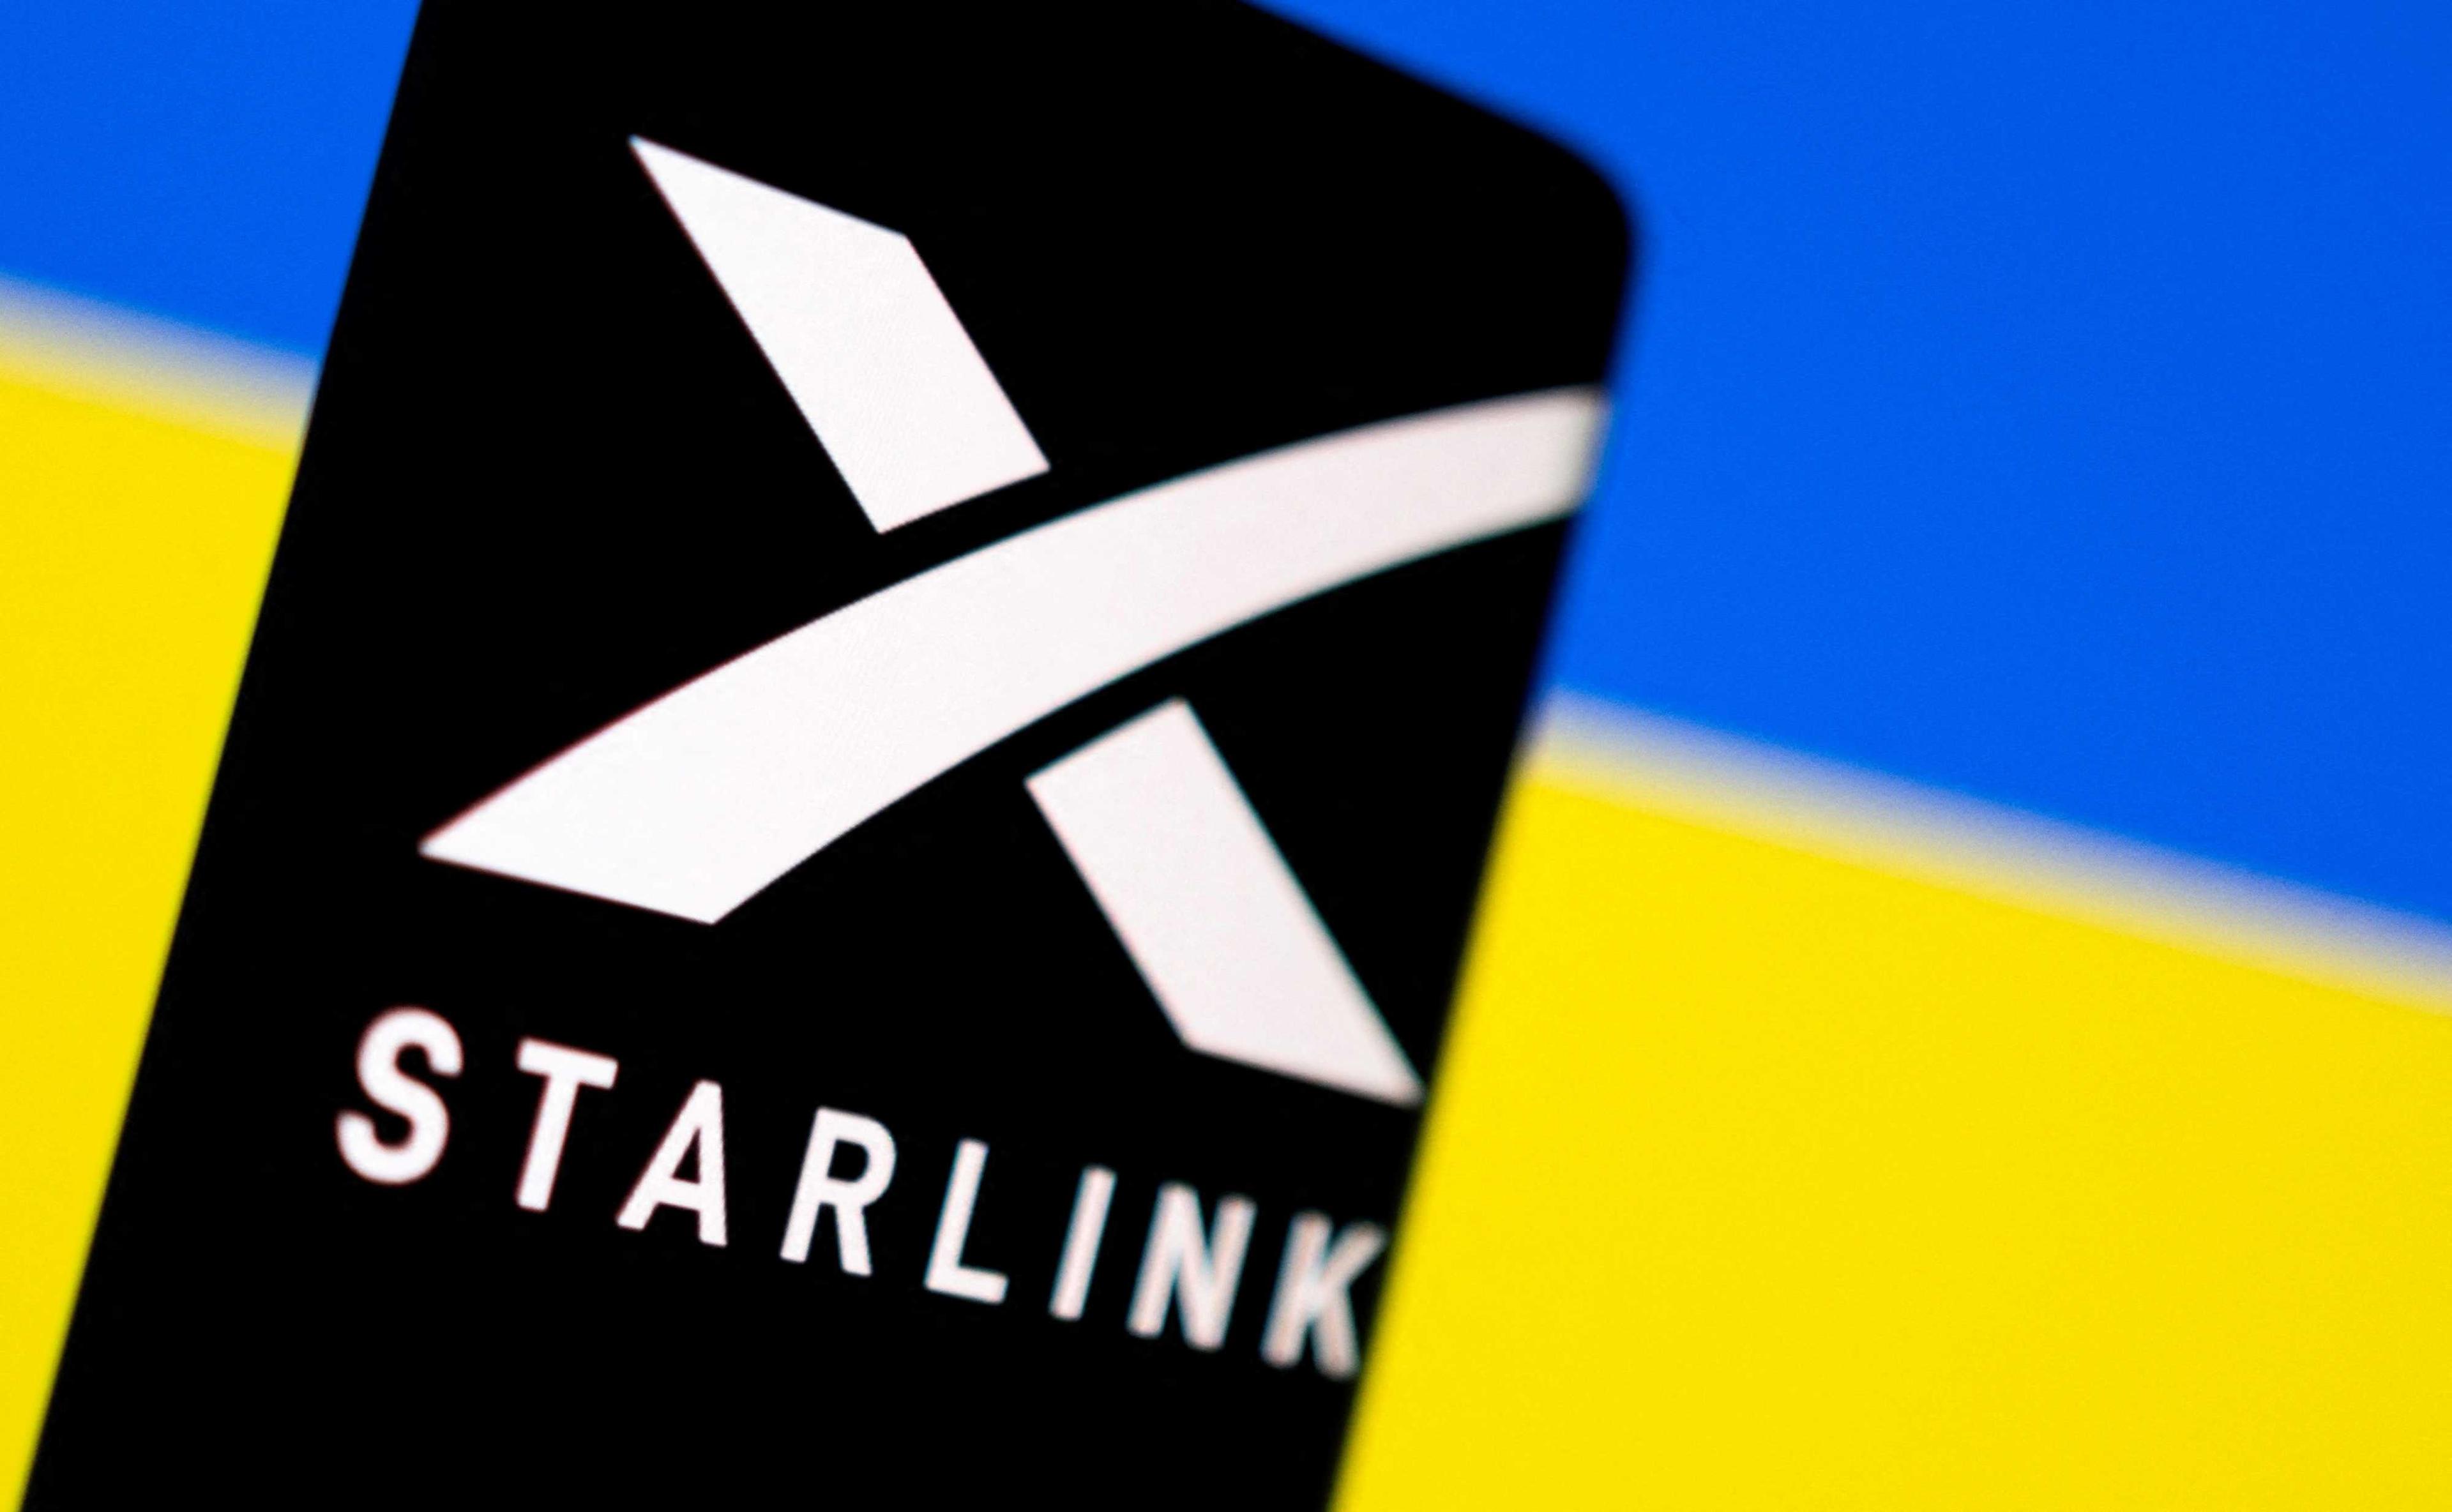 Starlink logo is seen on a smartphone in front of displayed Ukrainian flag in this illustration taken Feb 27. Photo: Reuters